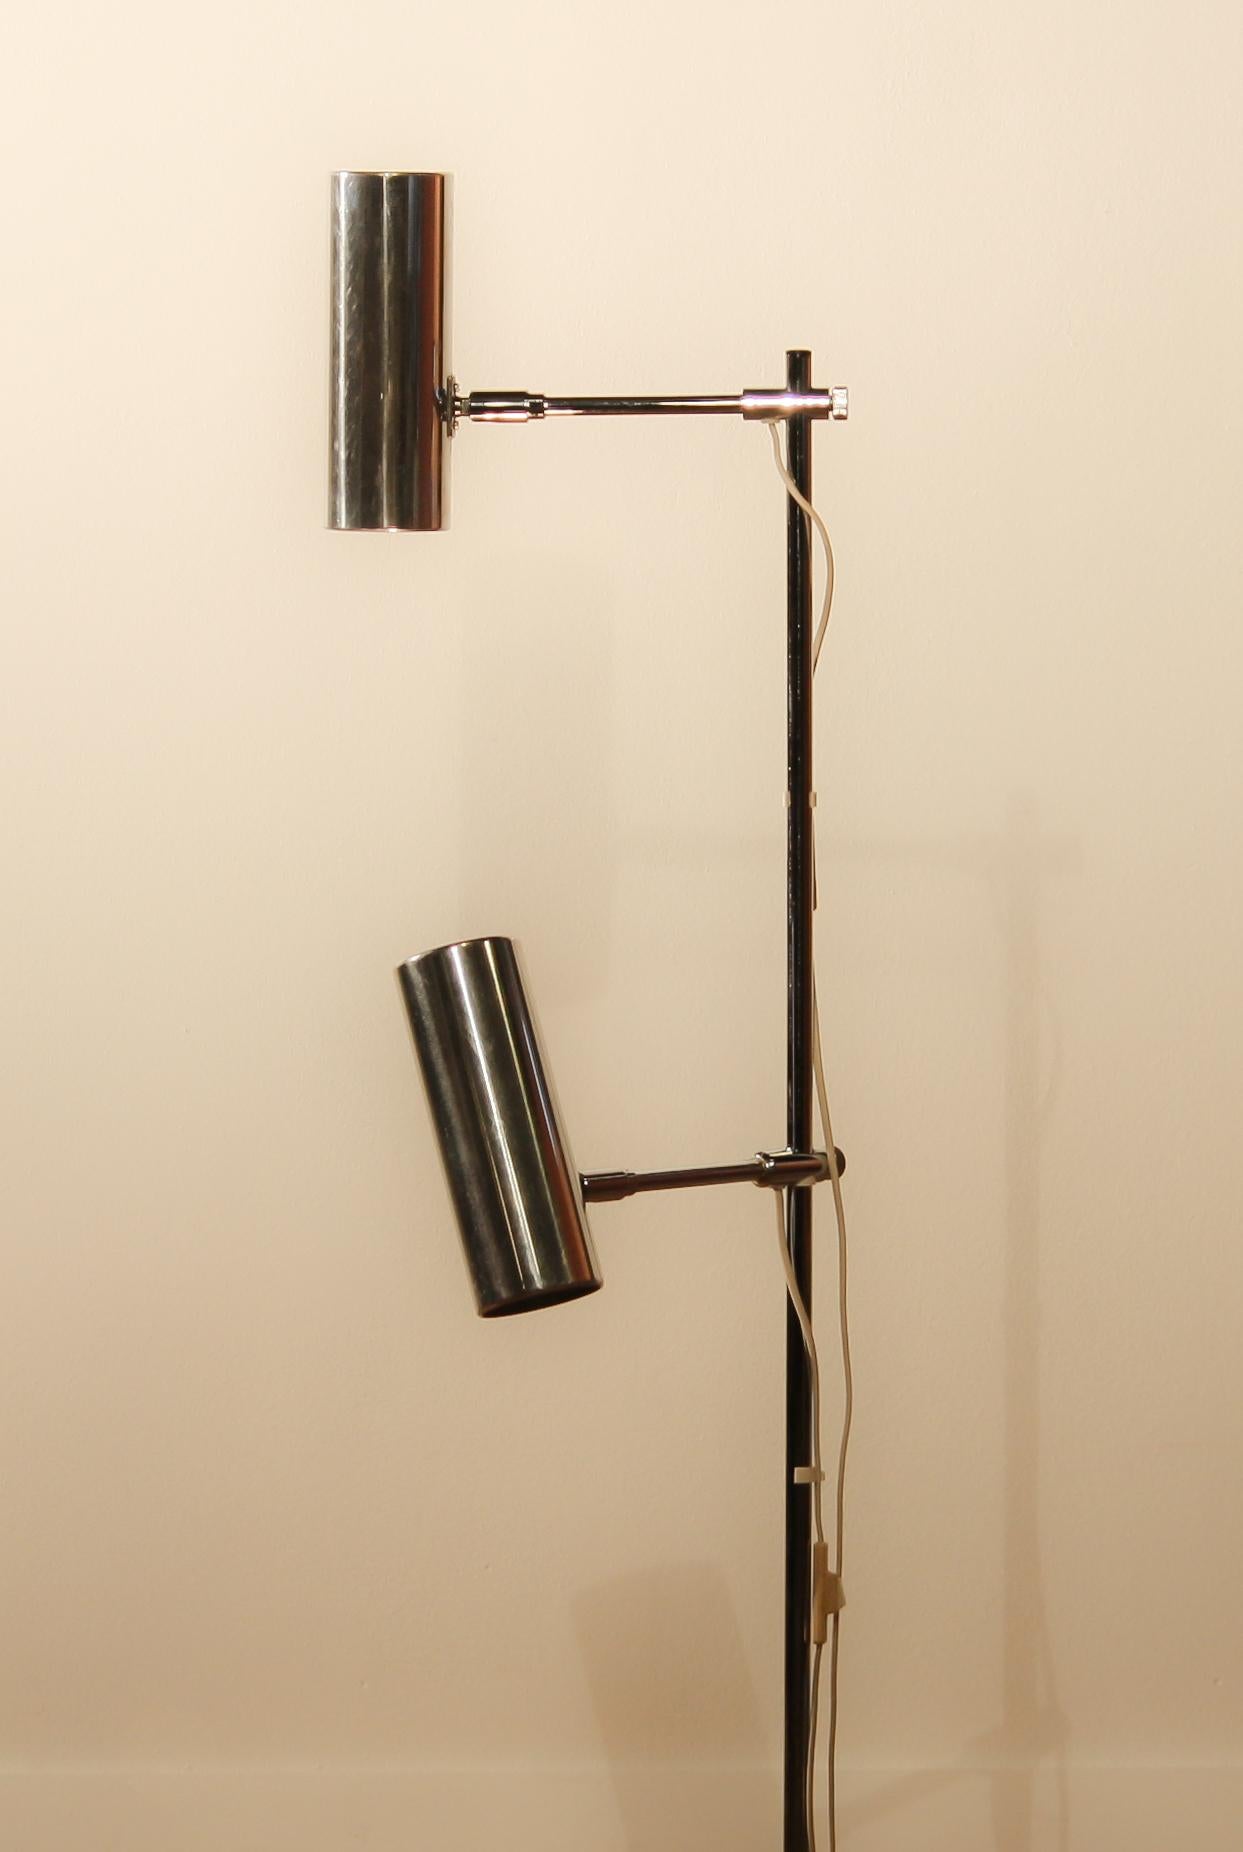 Beautiful floor lamp made by Bergboms scan light AB Sweden.
This lamp has two lights.
The lampshades are made of aluminium and the Stand is made of chromed steel.
It is in a nice working condition.
Period 1960s
Dimensions: H. 112 cm ø 23